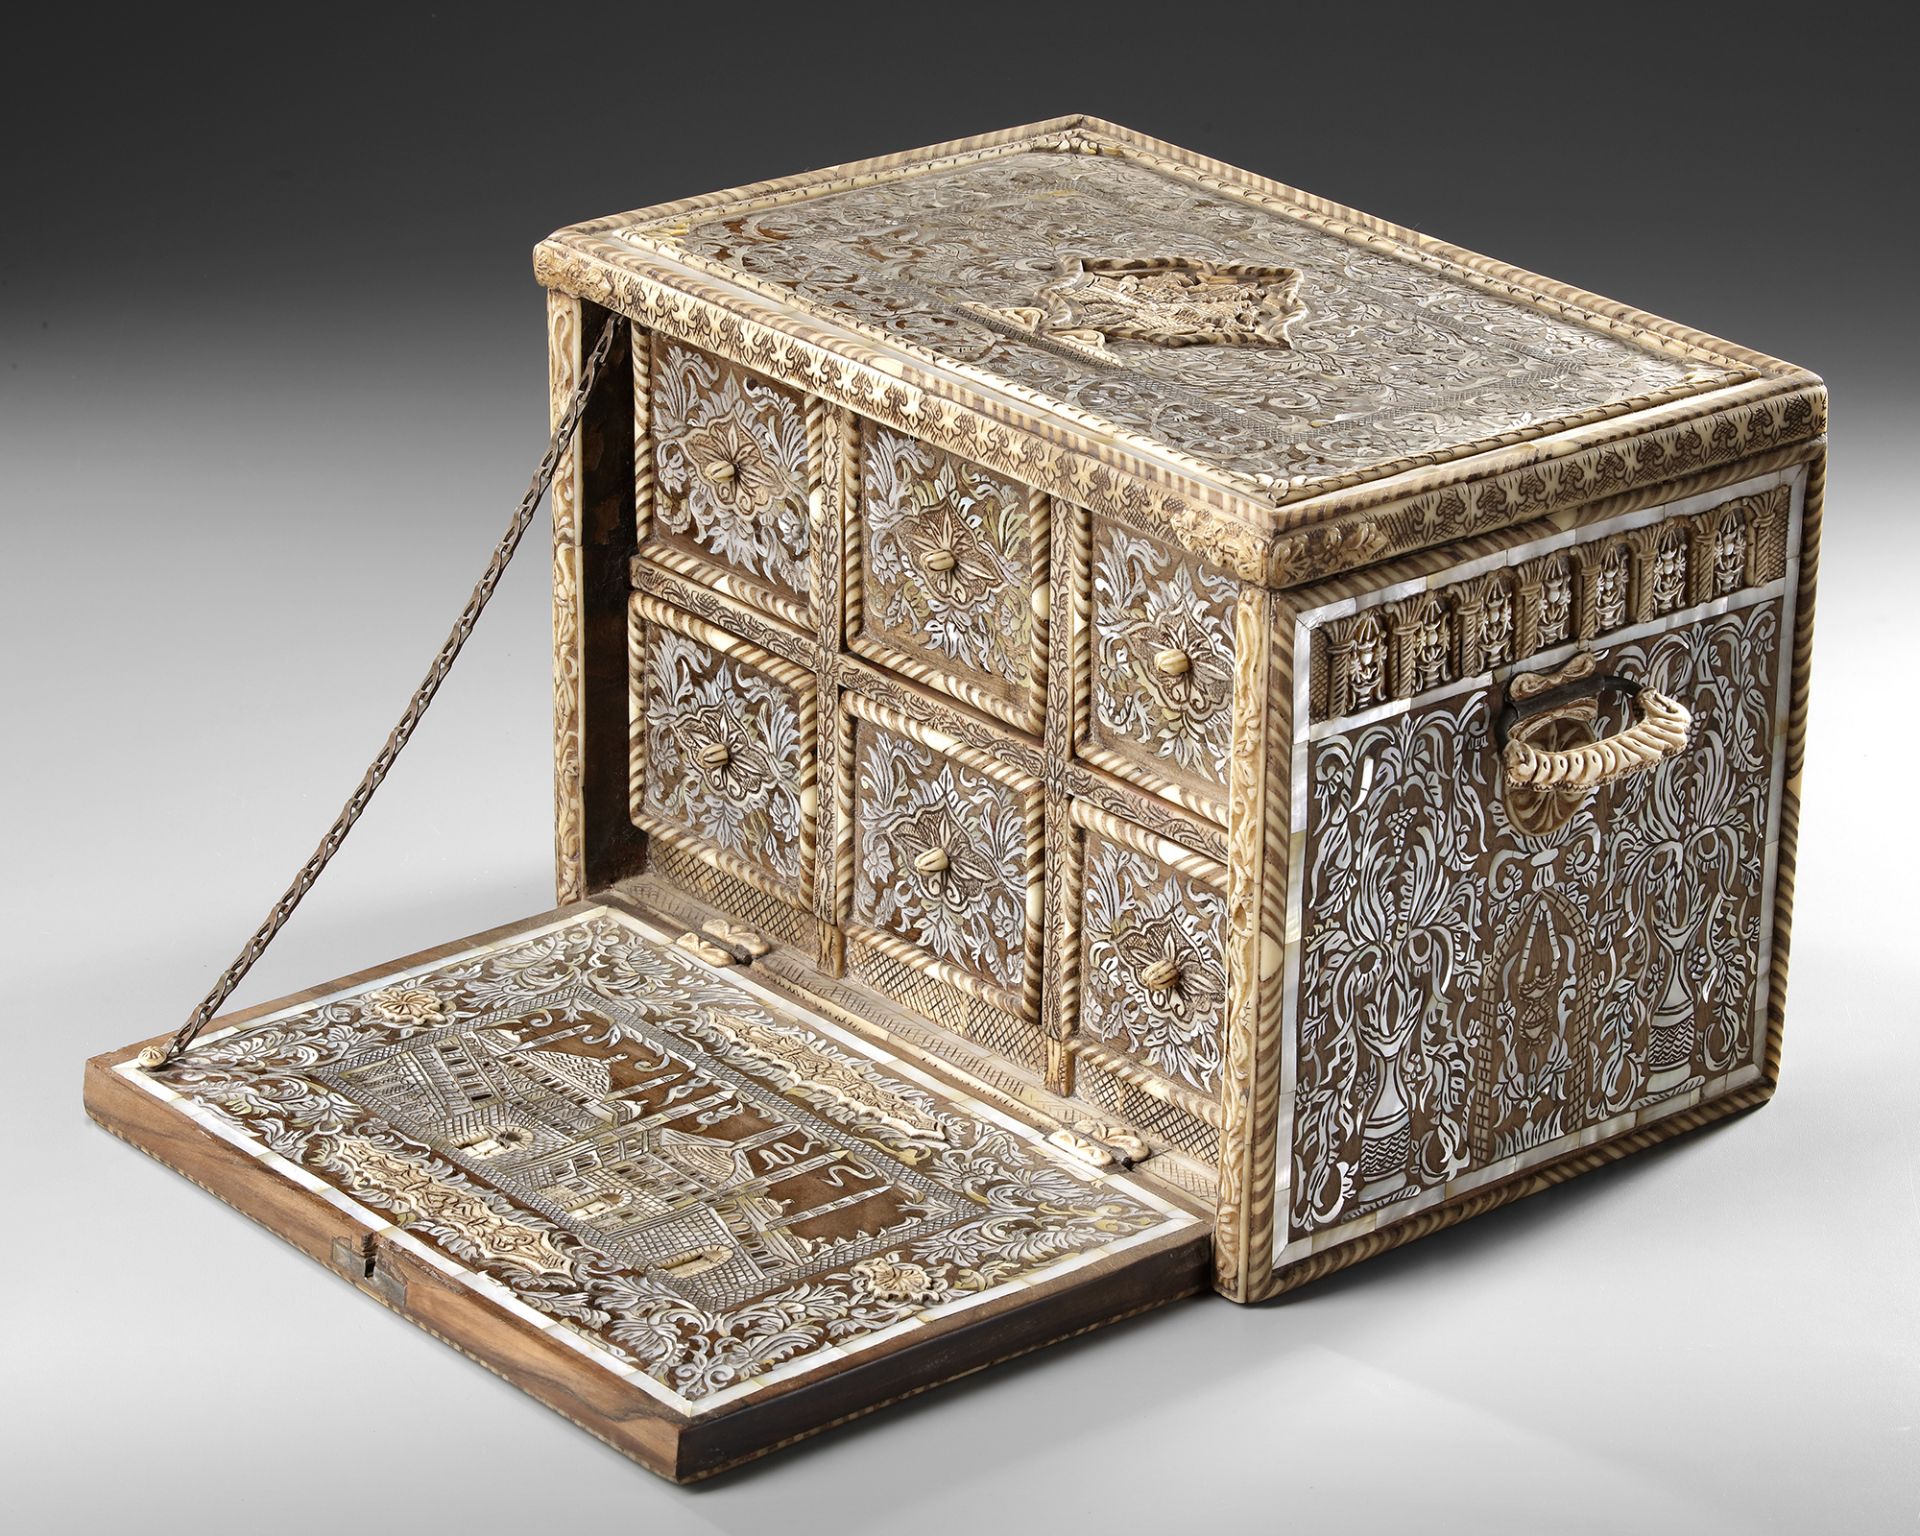 AN OTTOMAN MOTHER-OF-PEARL AND BONE INLAID CABINET, TURKEY OR SYRIA, 18TH-19TH CENTURY - Bild 4 aus 6